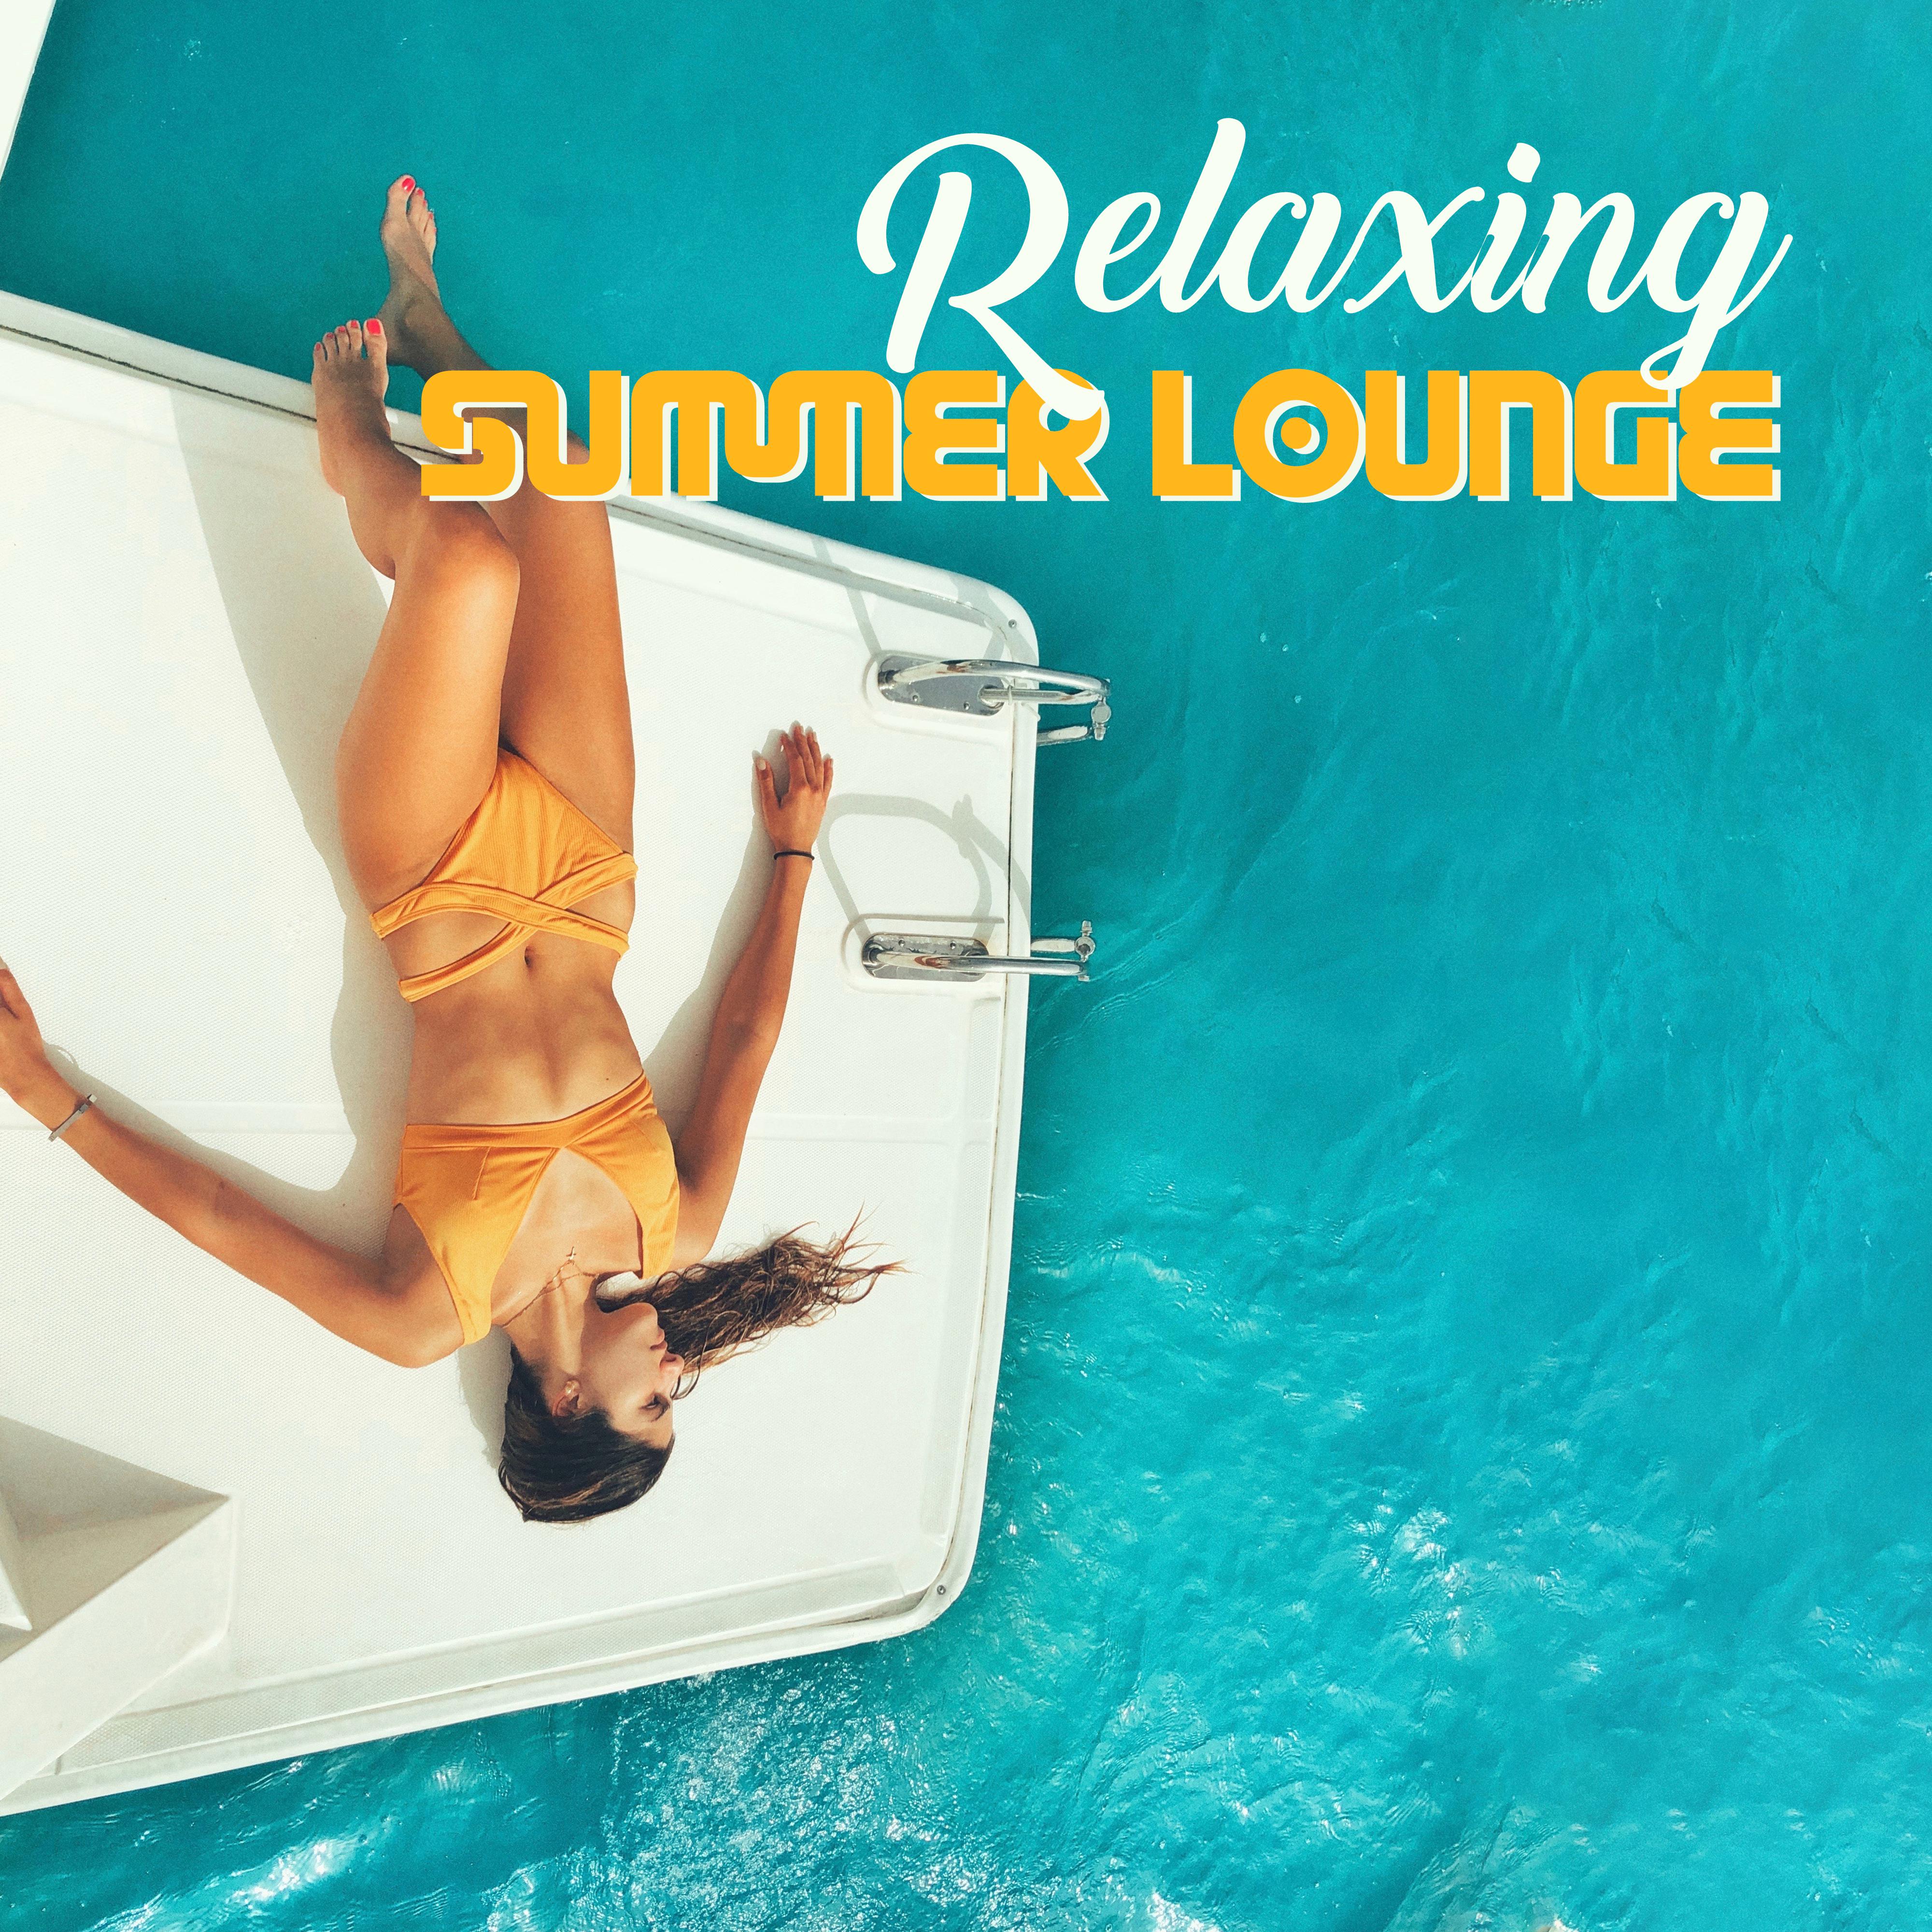 Relaxing Summer Lounge - **** Party Hits, Sunny Chillout, Ibiza Lounge, Beach Music, Chill Zone Music, Summer 2019